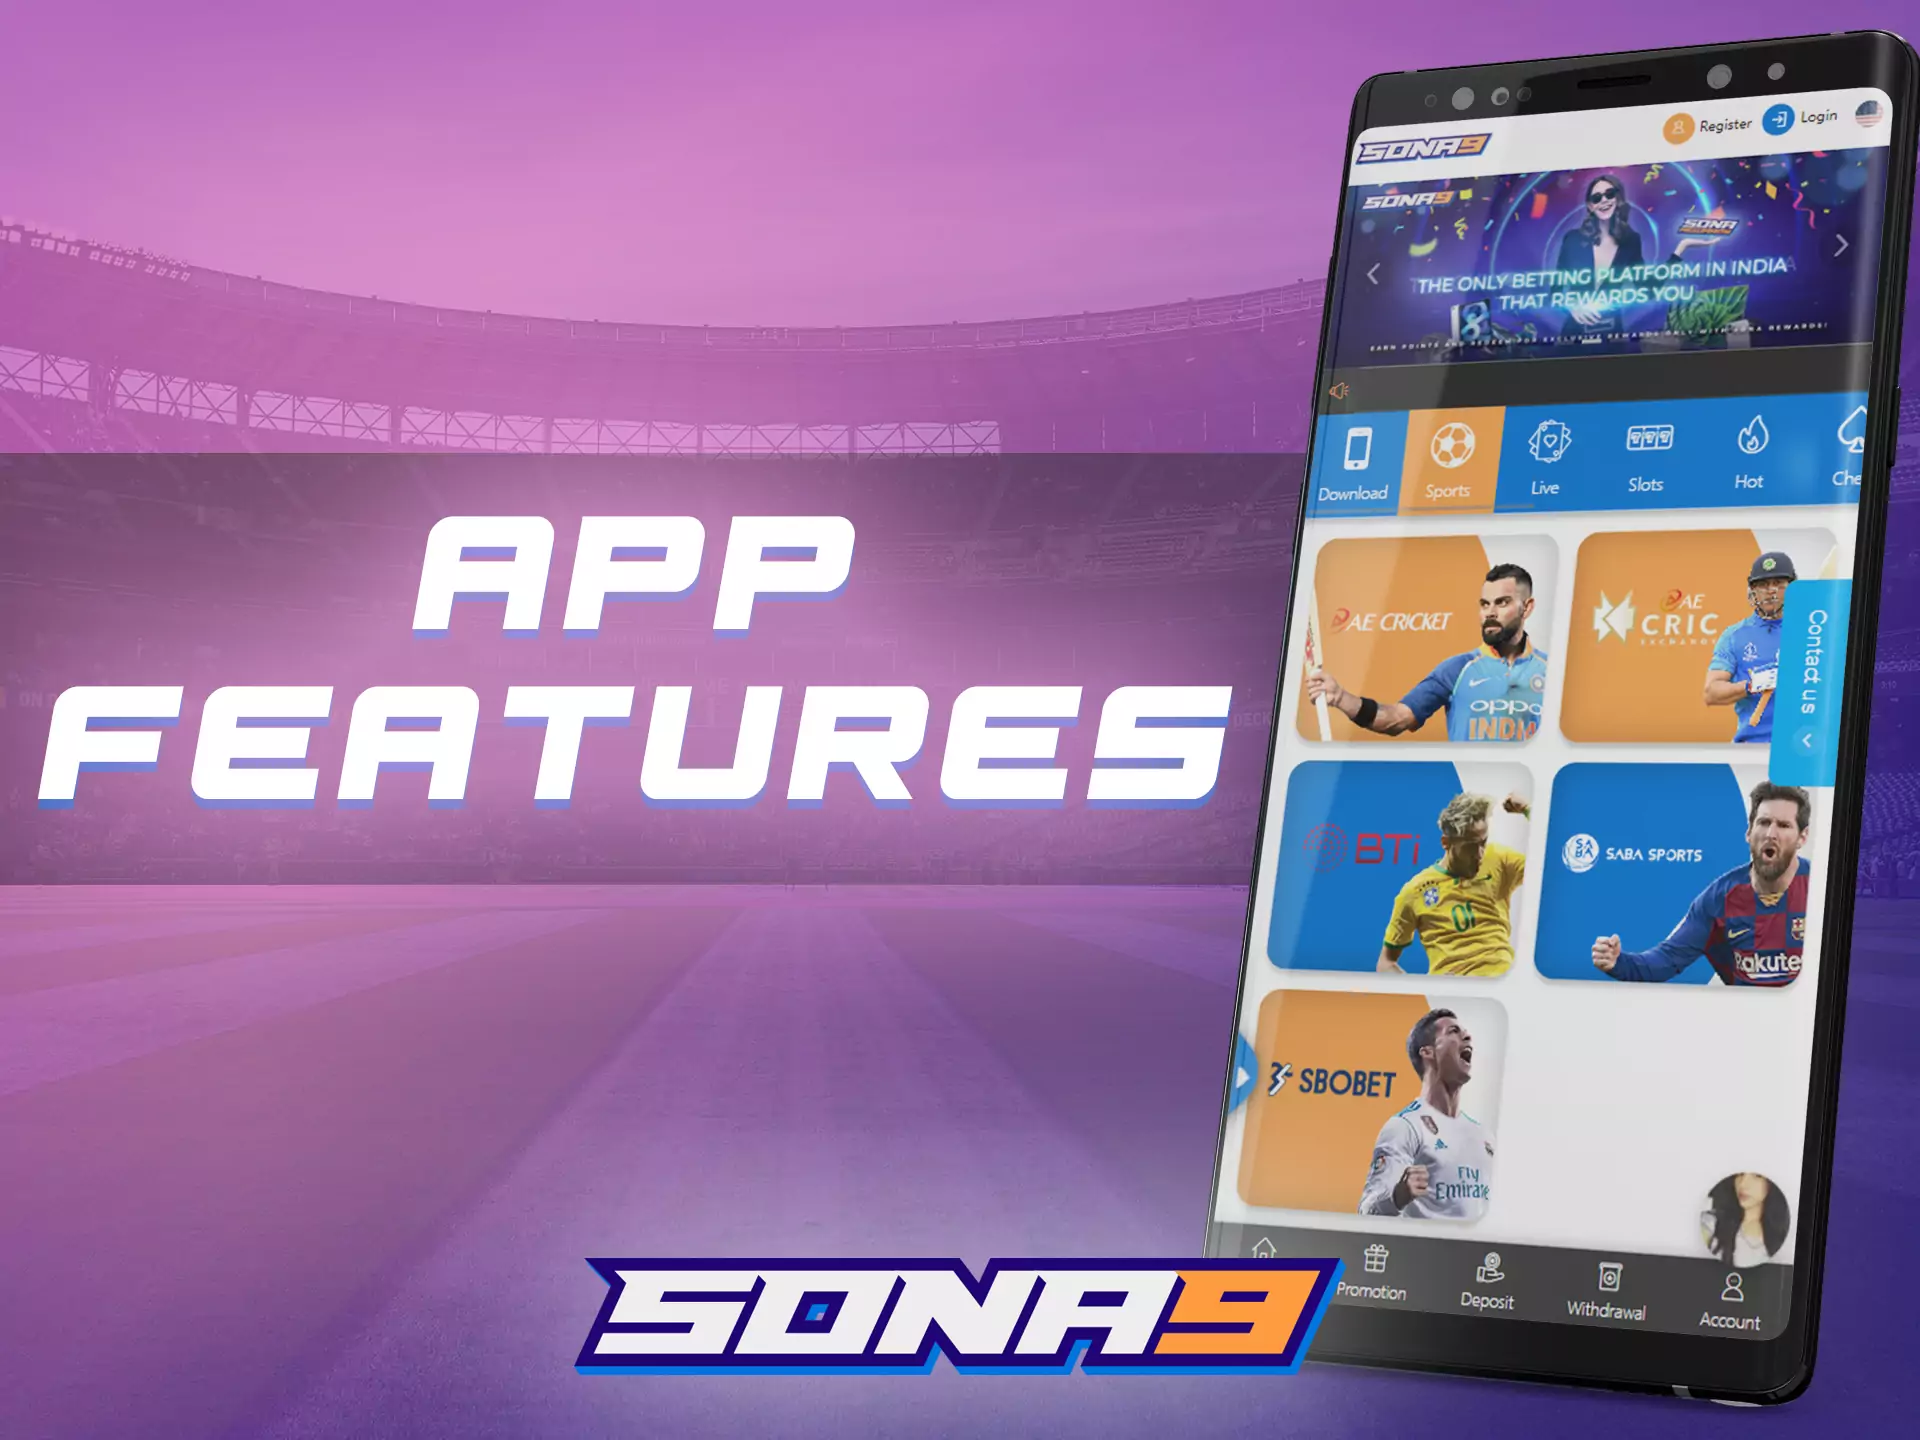 The Sona9 app is liked by Indian users for its reliability.